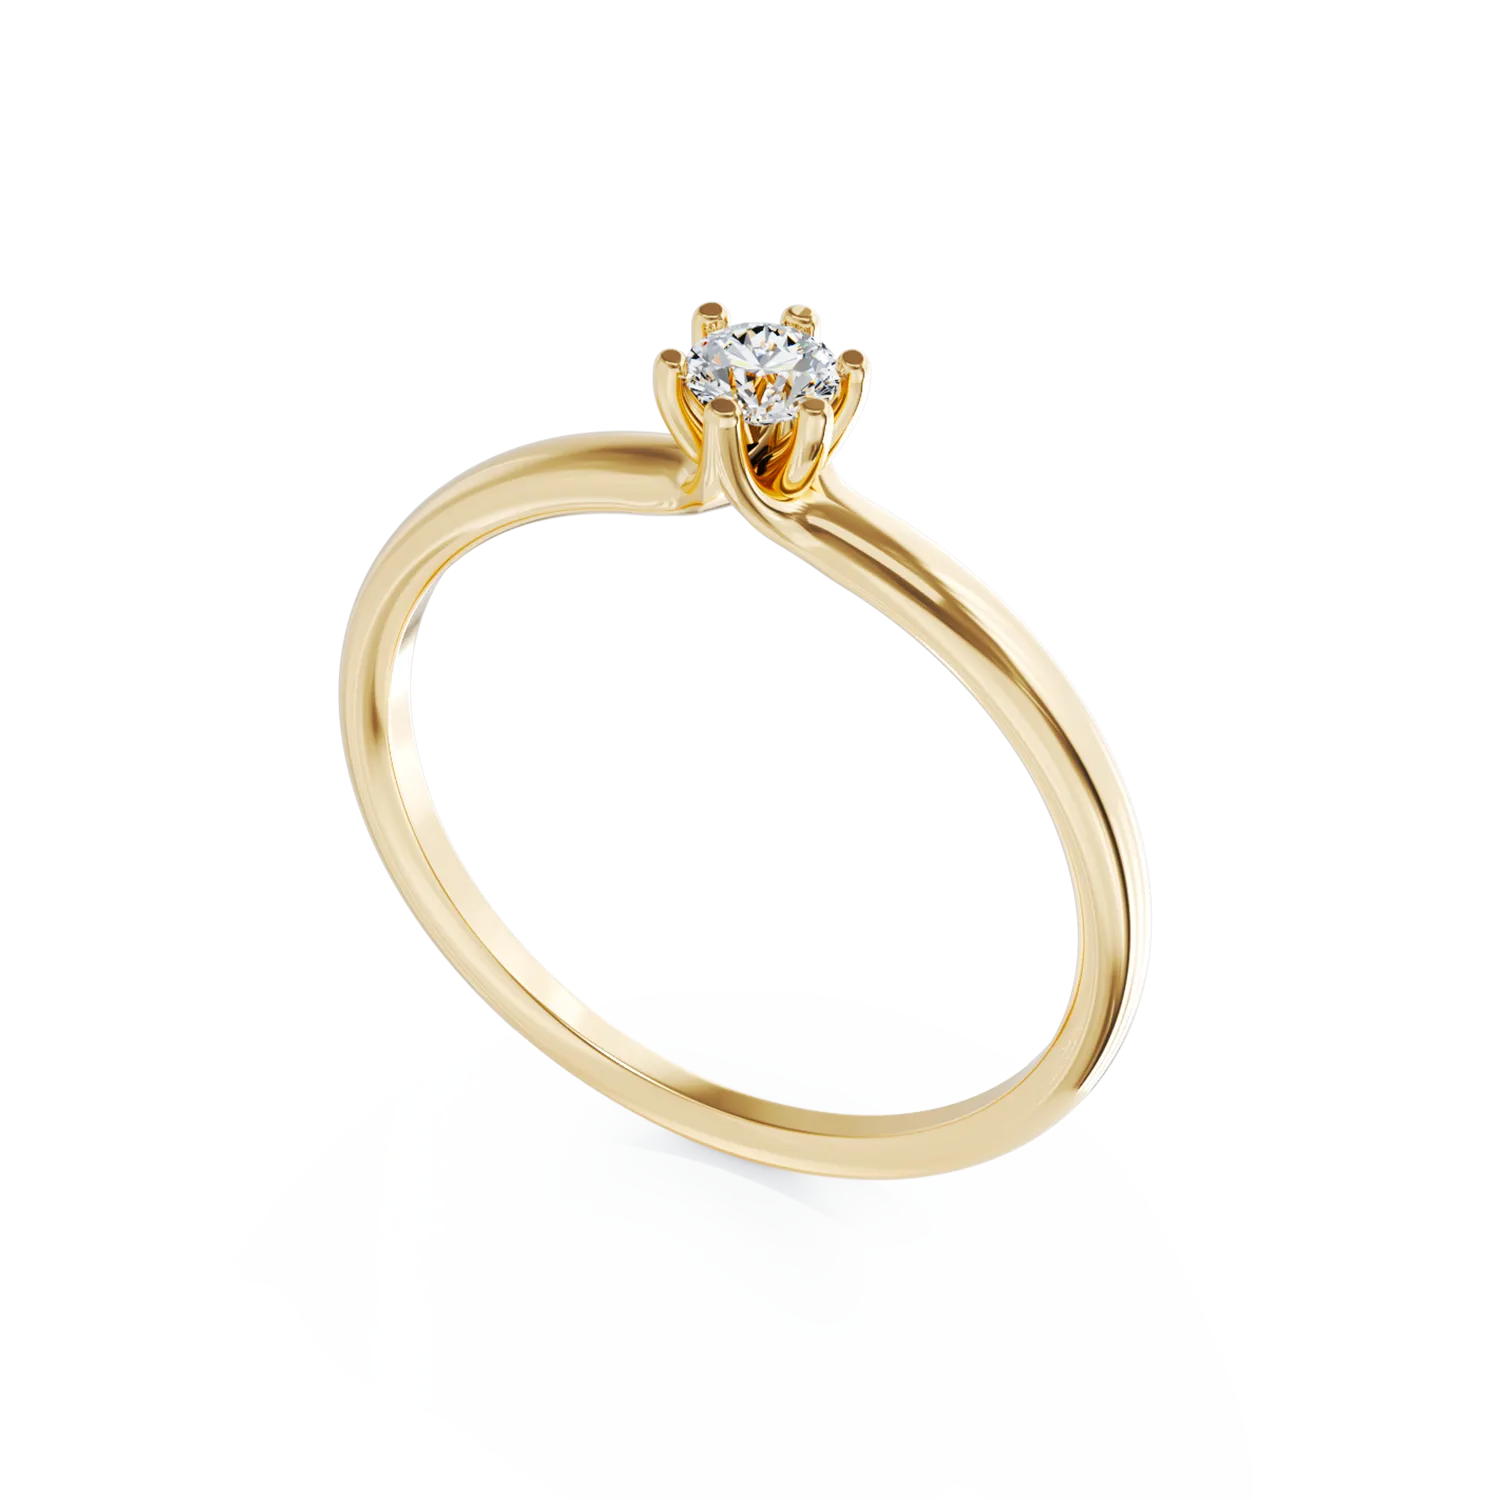 18K yellow gold engagement ring with a 0.11ct solitaire diamond